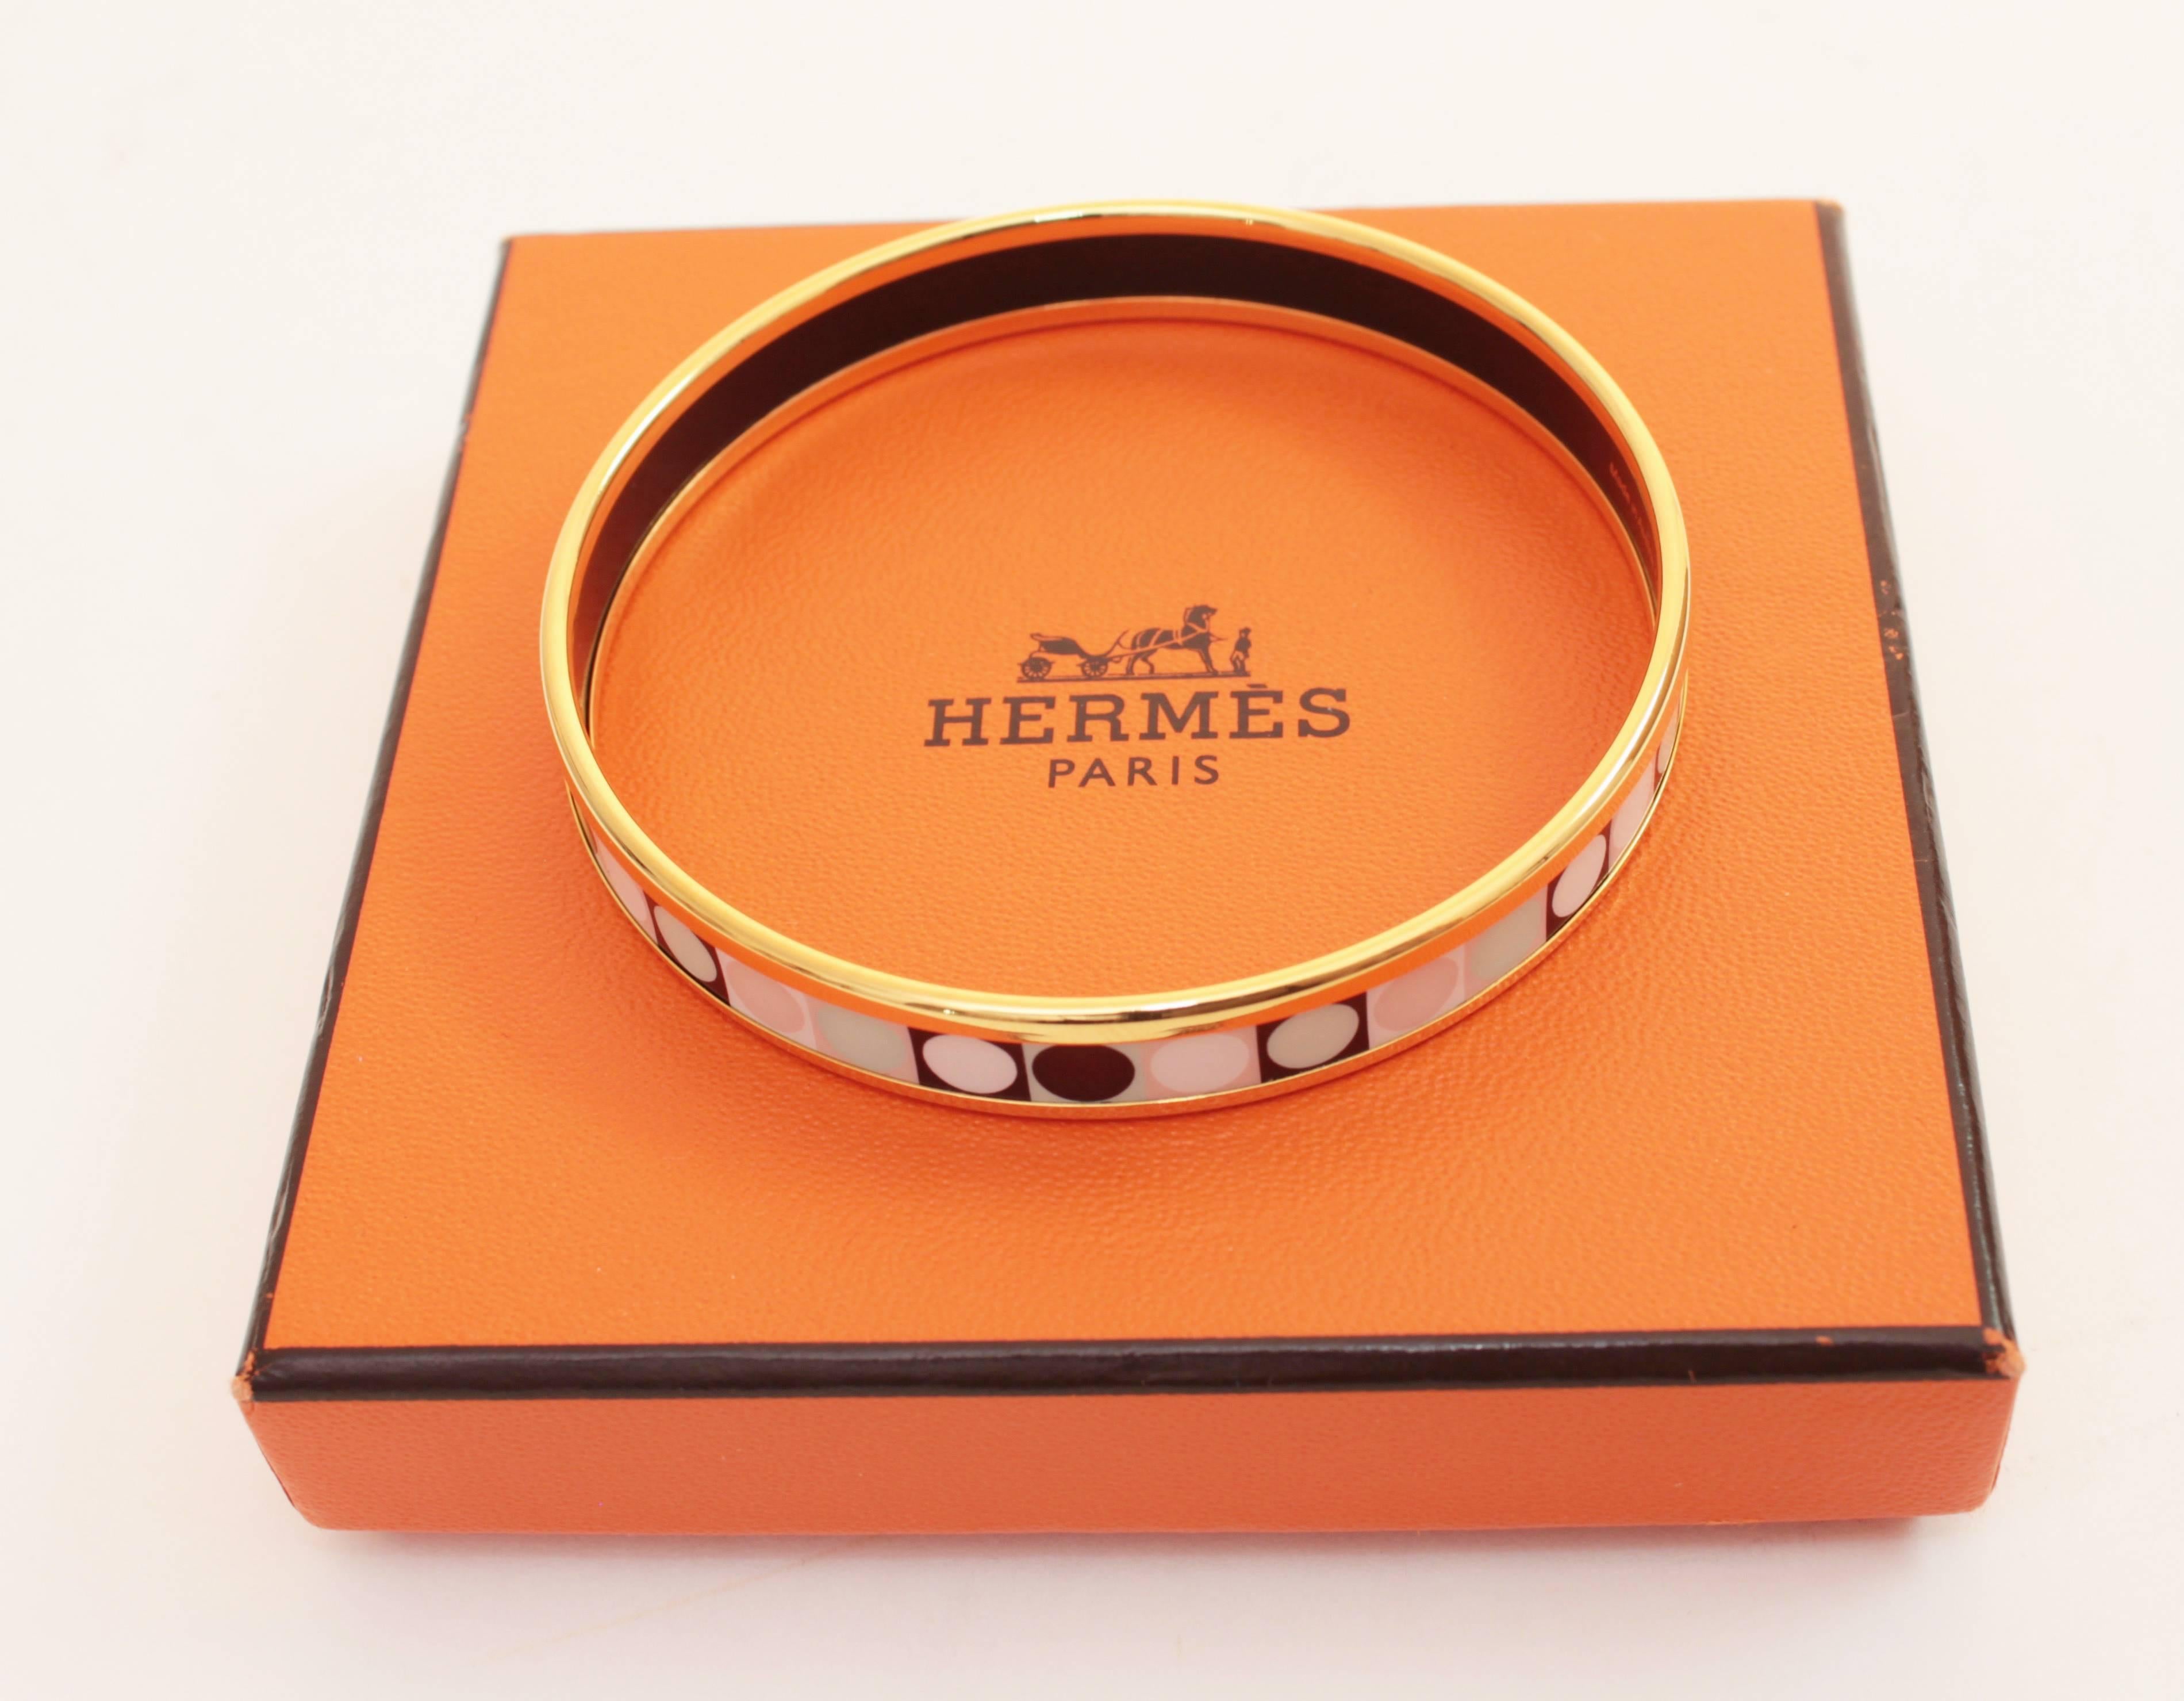 In excellent preowned condition with minimal signs of prior wear.  Comes with box (box shows signs of wear).  Size 62 measures appx 2.4 in D and .5in H.  Stamped HERMES 